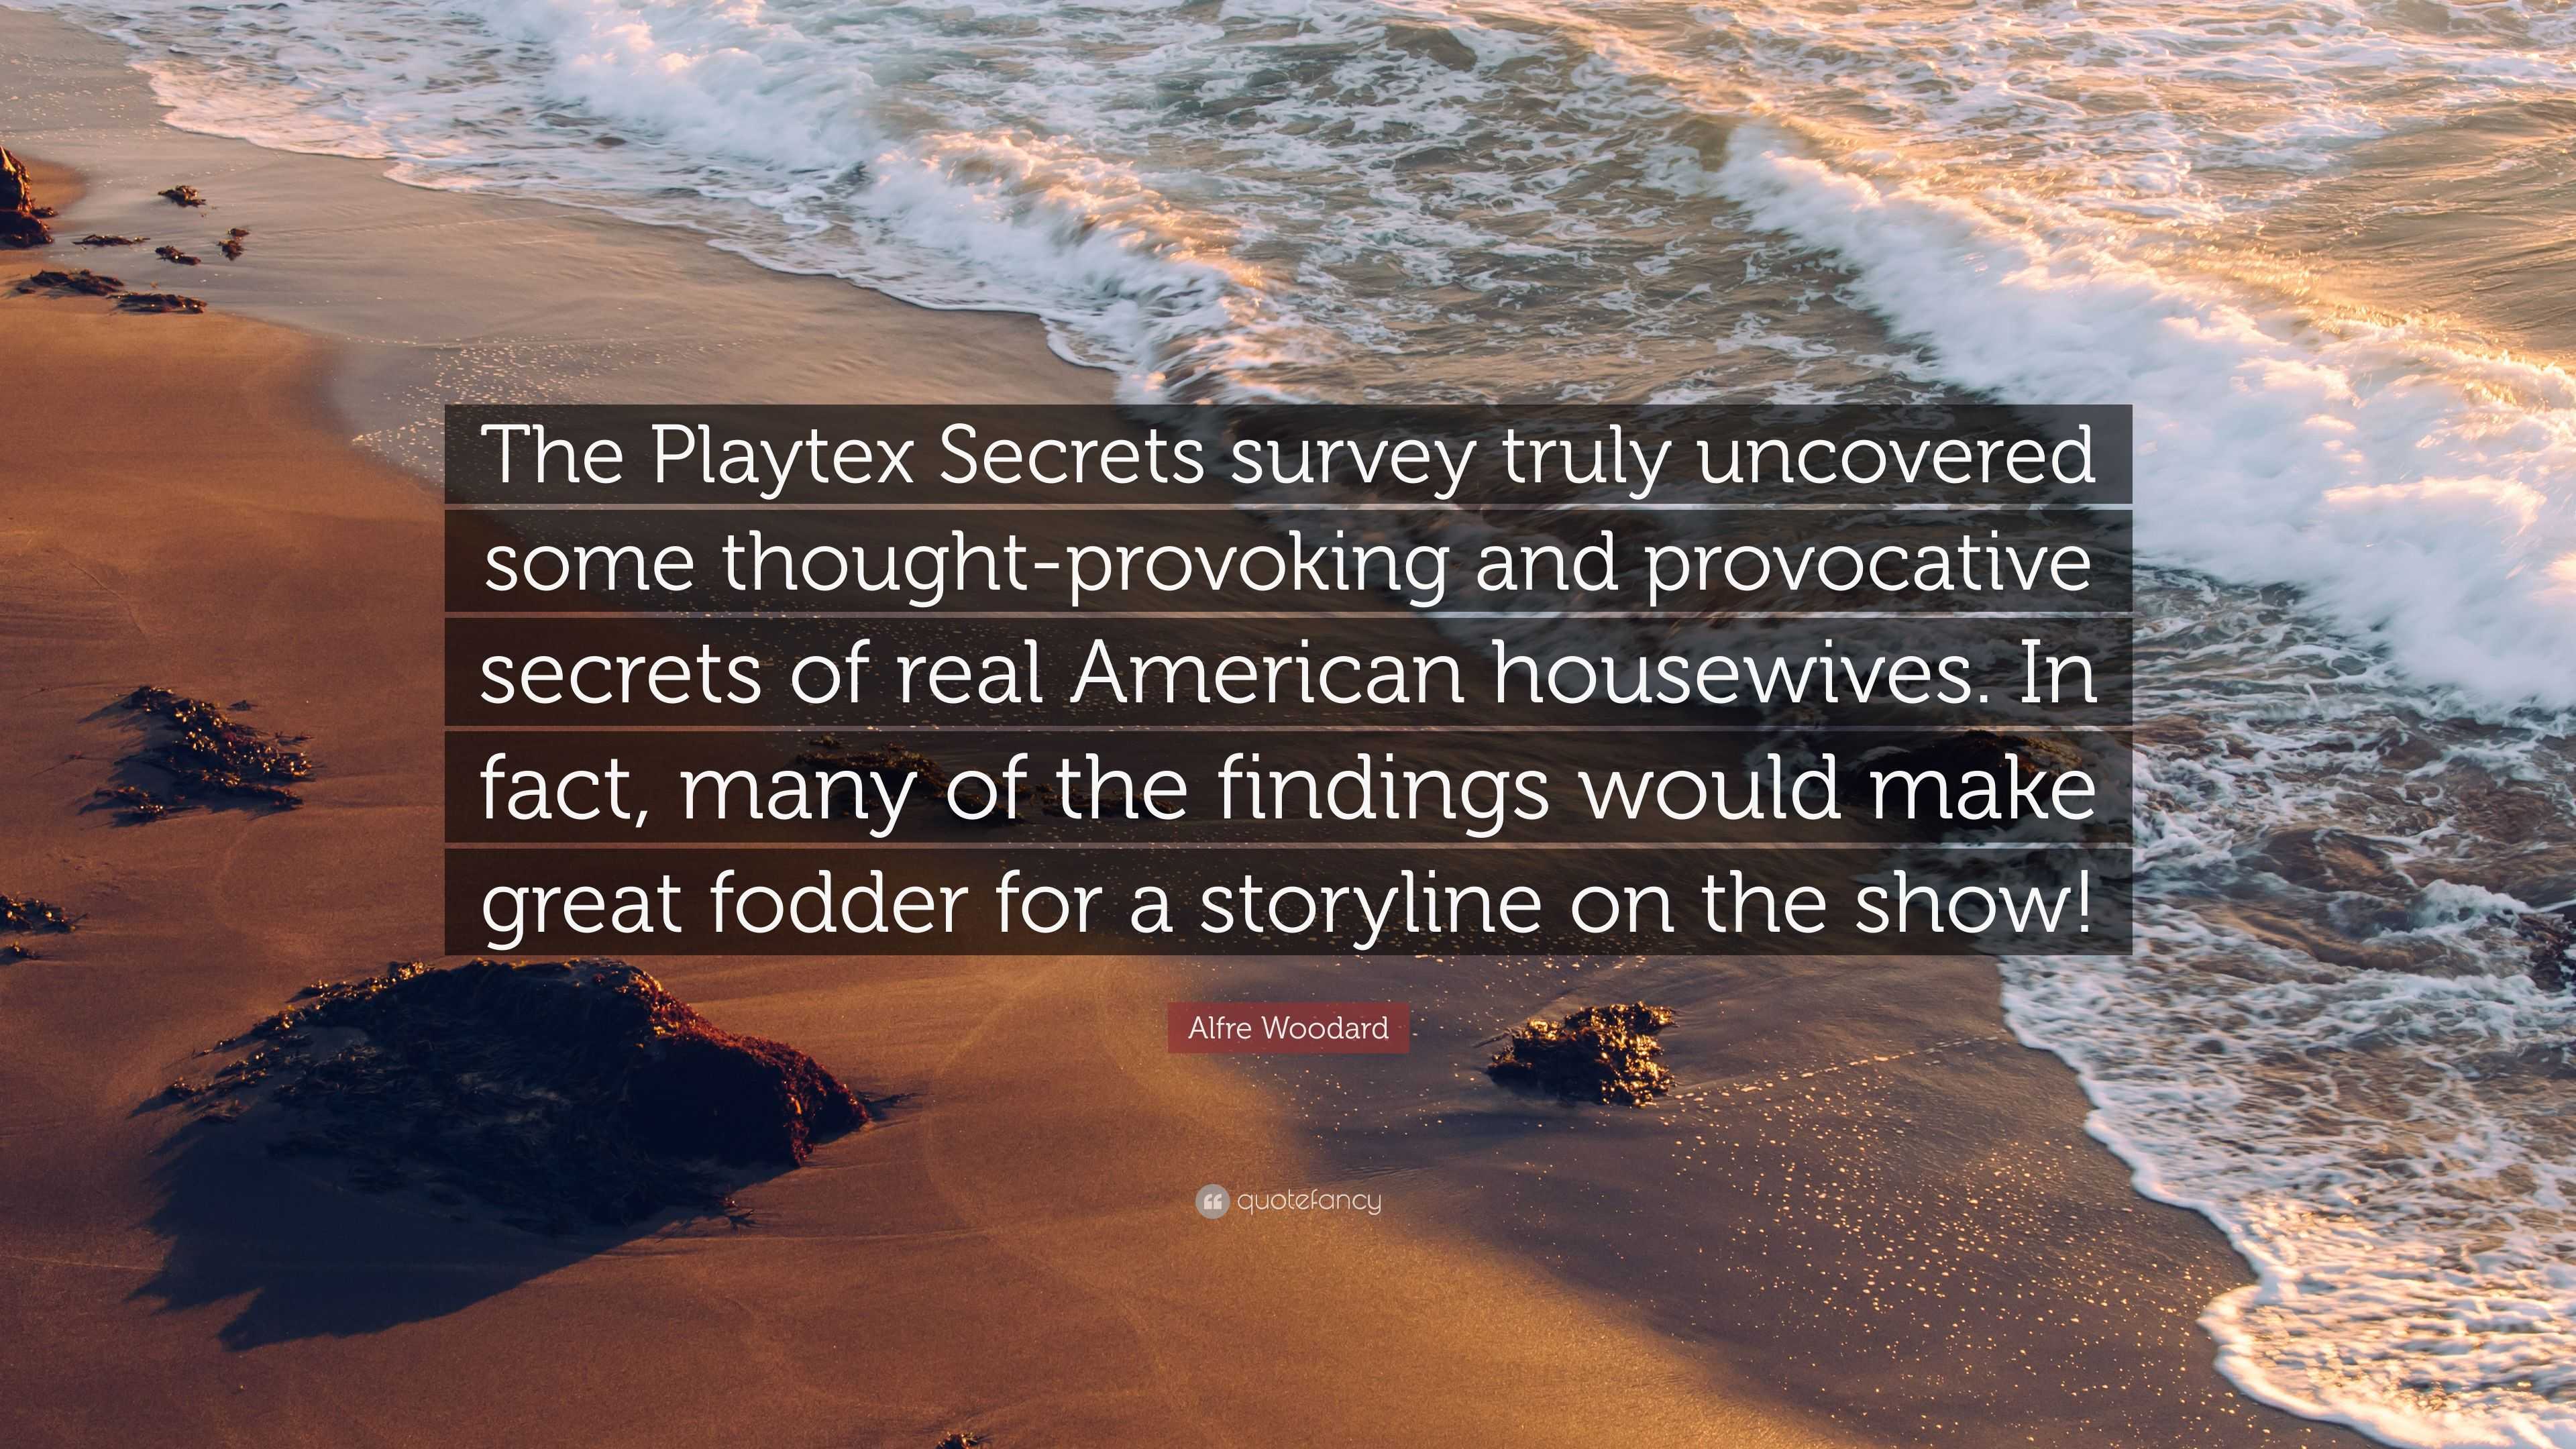 https://quotefancy.com/media/wallpaper/3840x2160/3992422-Alfre-Woodard-Quote-The-Playtex-Secrets-survey-truly-uncovered.jpg